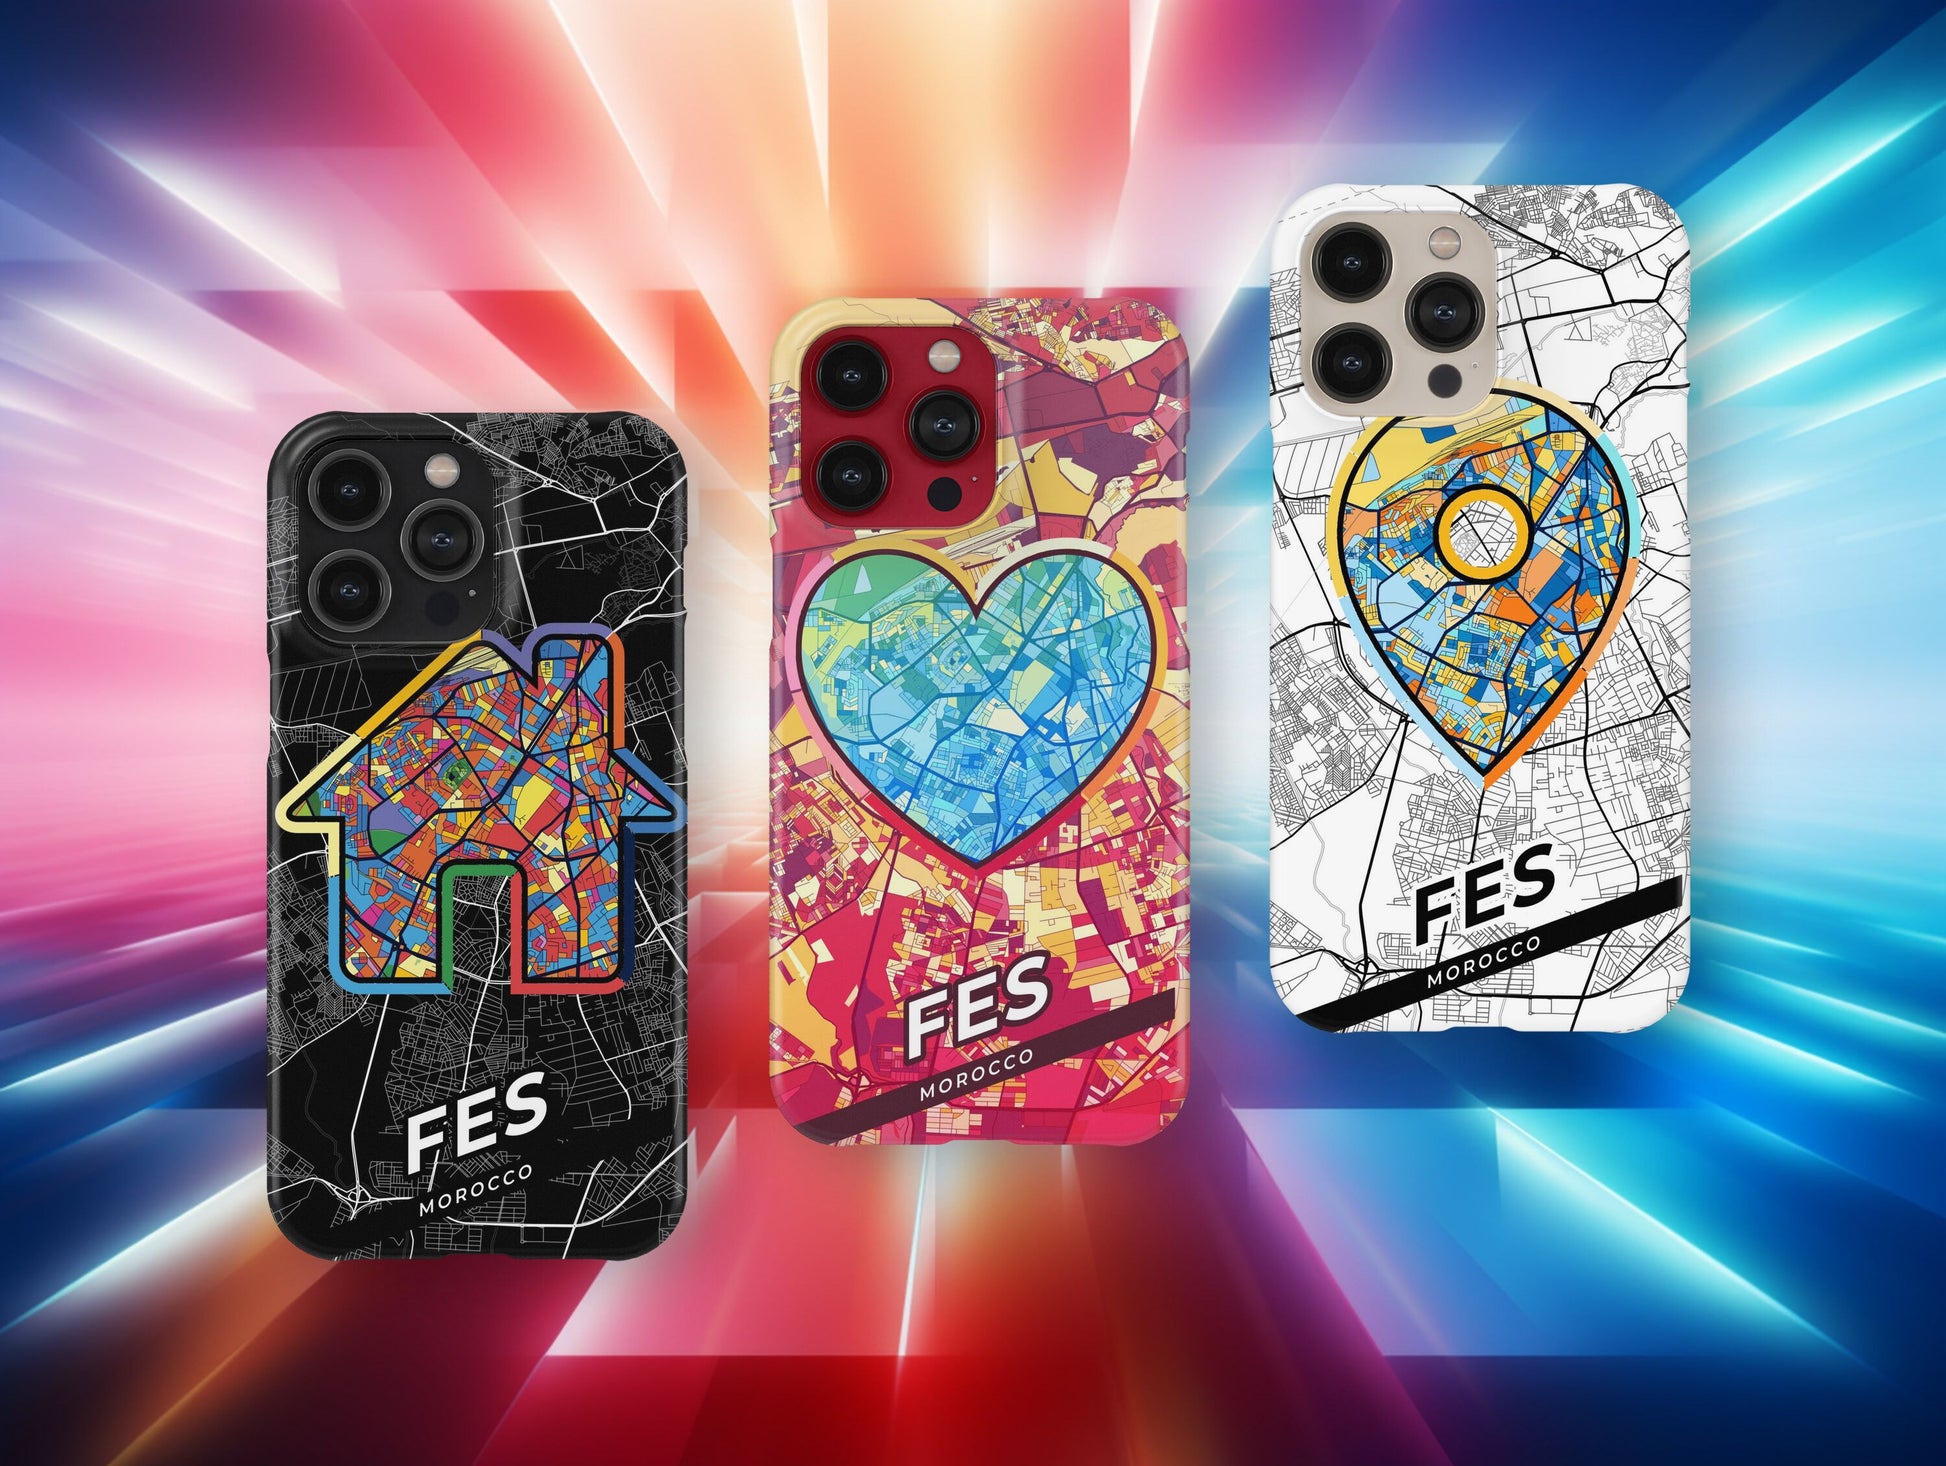 Fes Morocco slim phone case with colorful icon. Birthday, wedding or housewarming gift. Couple match cases.